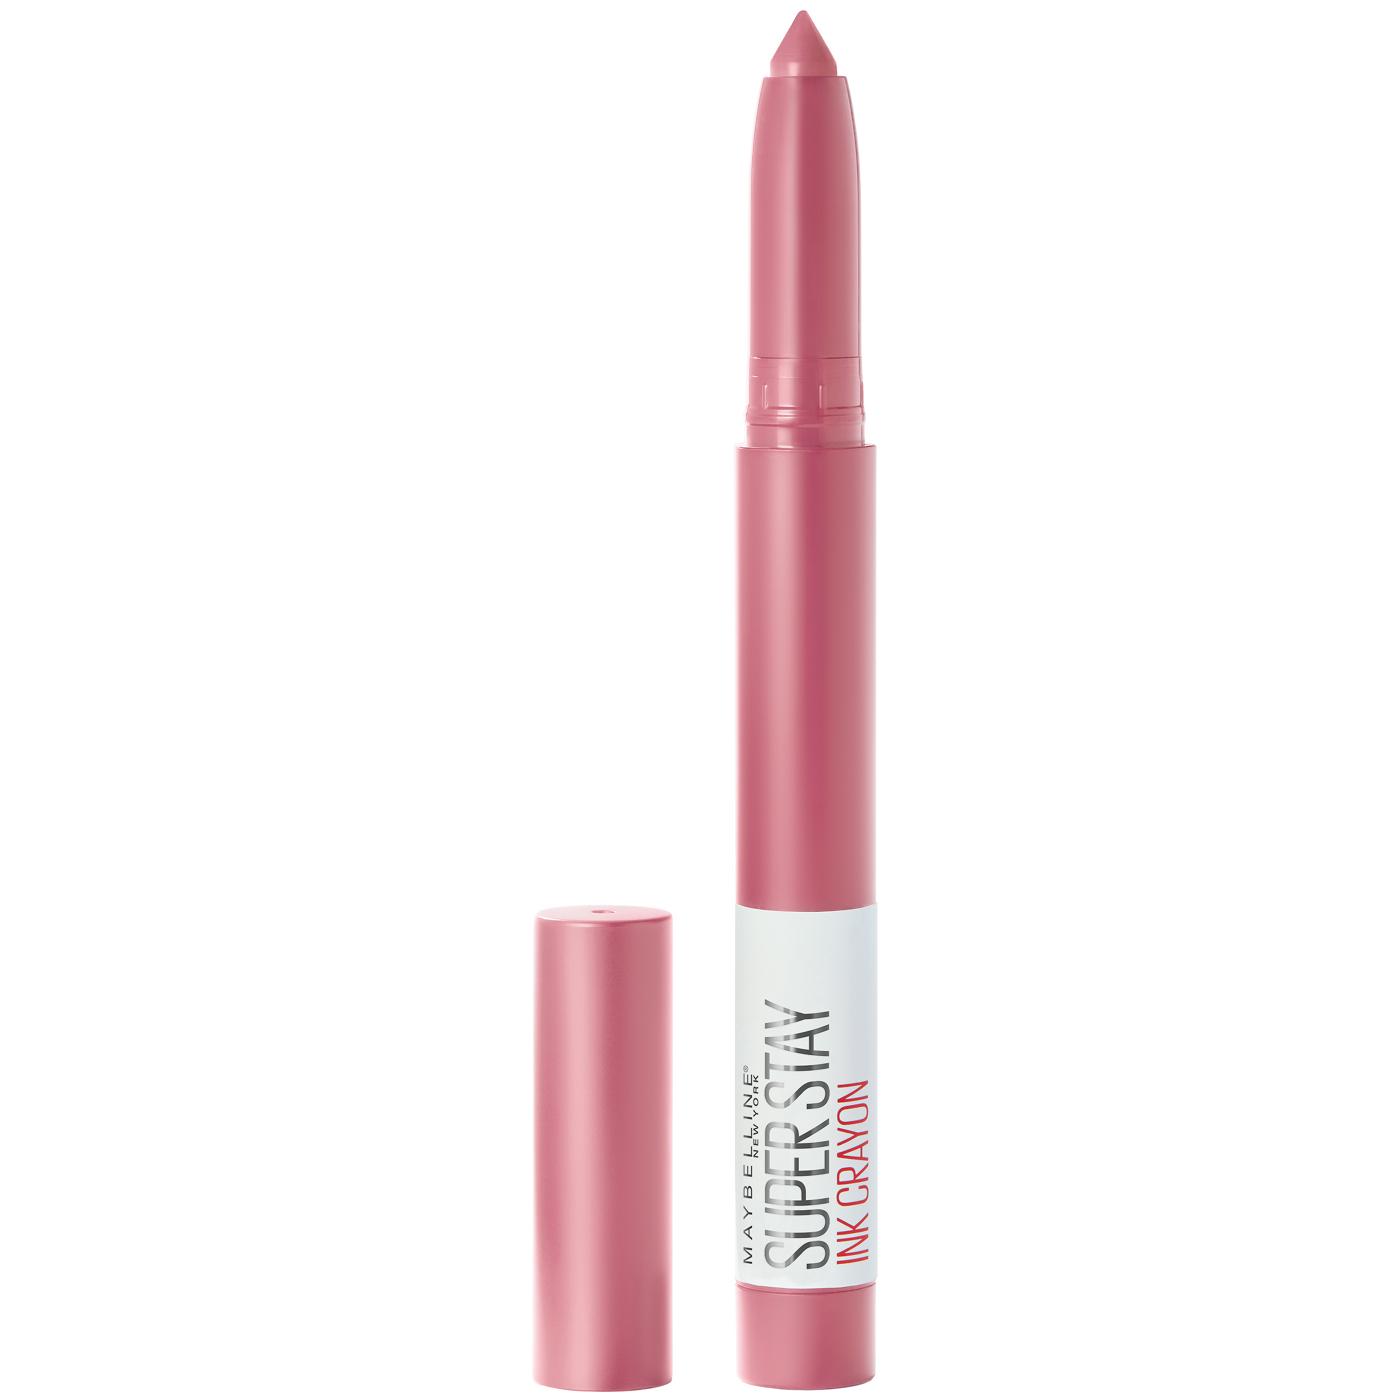 Maybelline Super Stay Ink Crayon Lipstick - Adventure; image 1 of 5